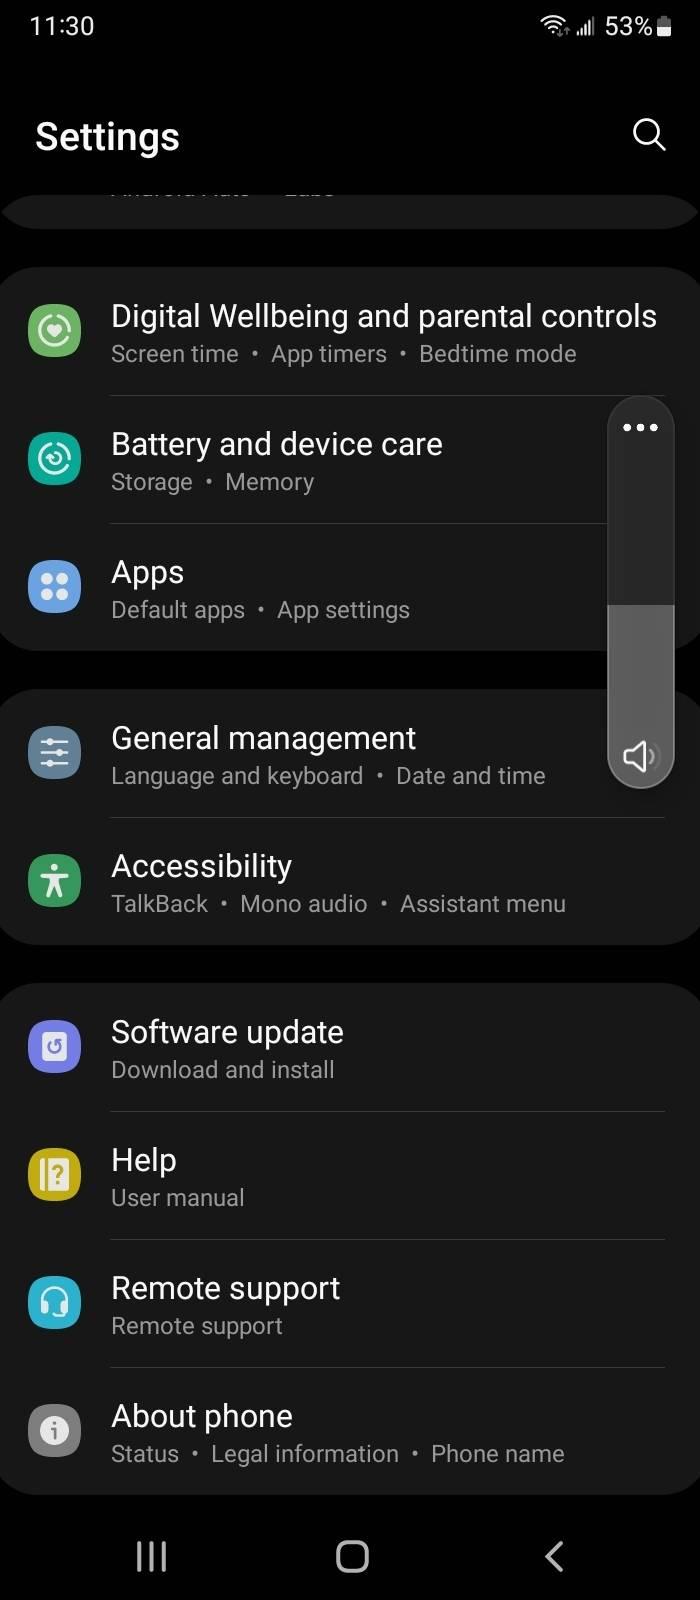 A screenshot of the settings screen on an Android phone.